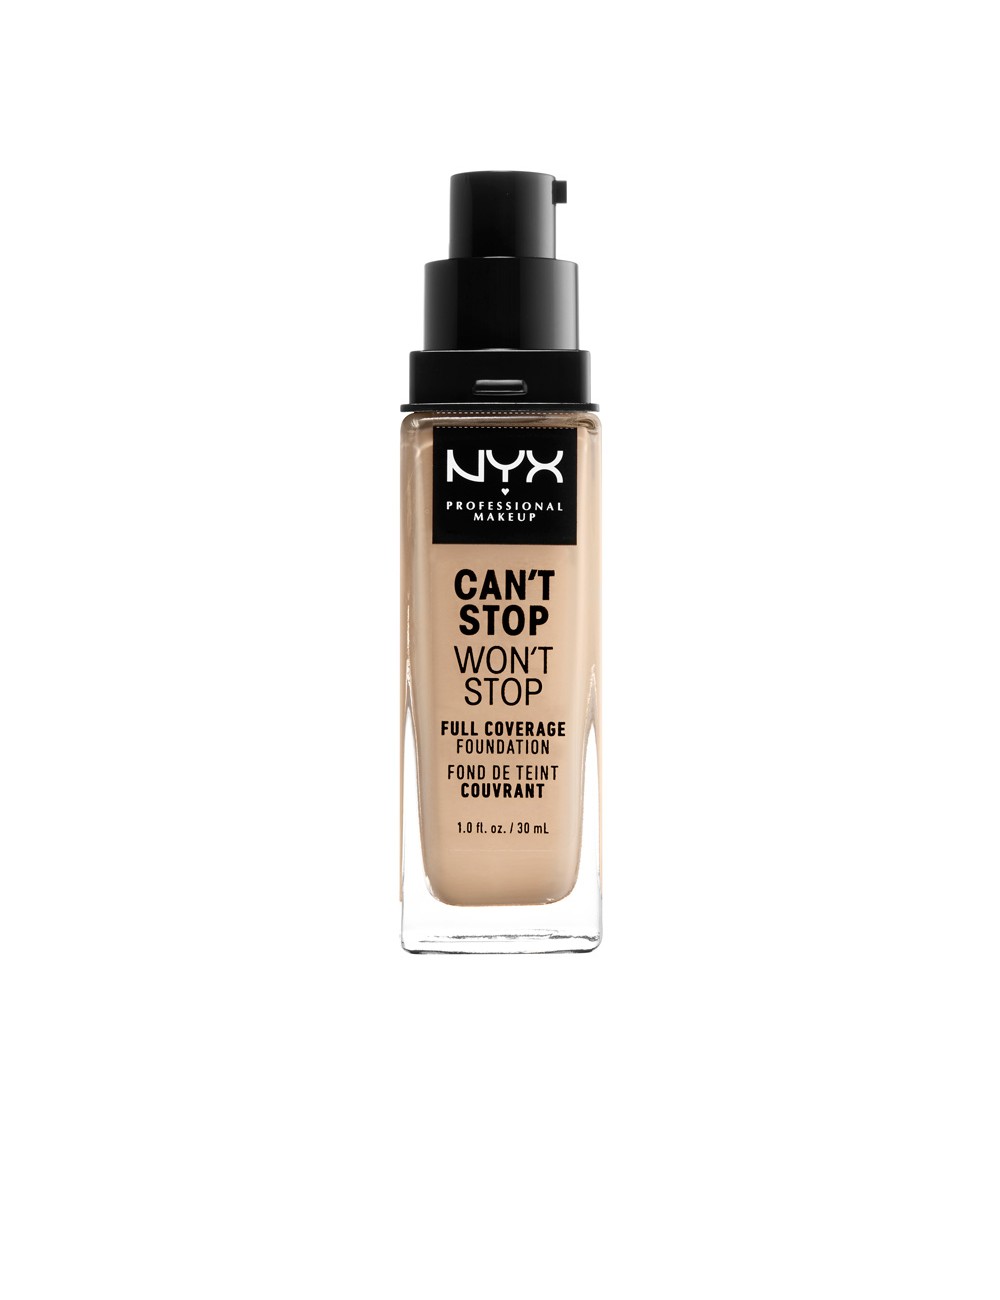 CAN'T STOP WON'T STOP full coverage foundation warm vanilla